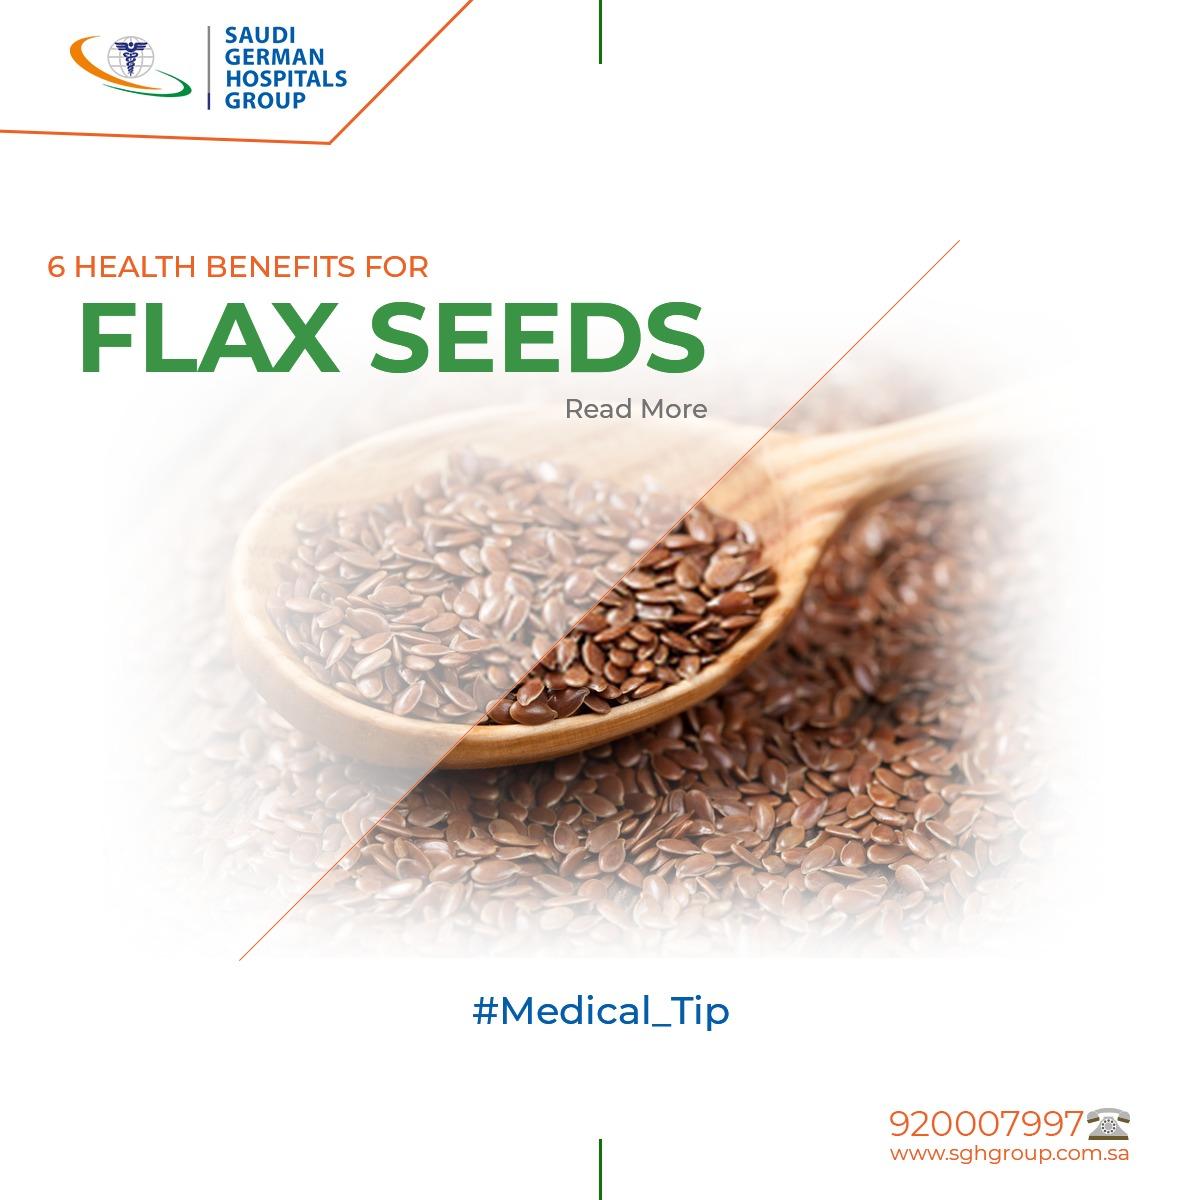 6 Health benefits for flax seeds